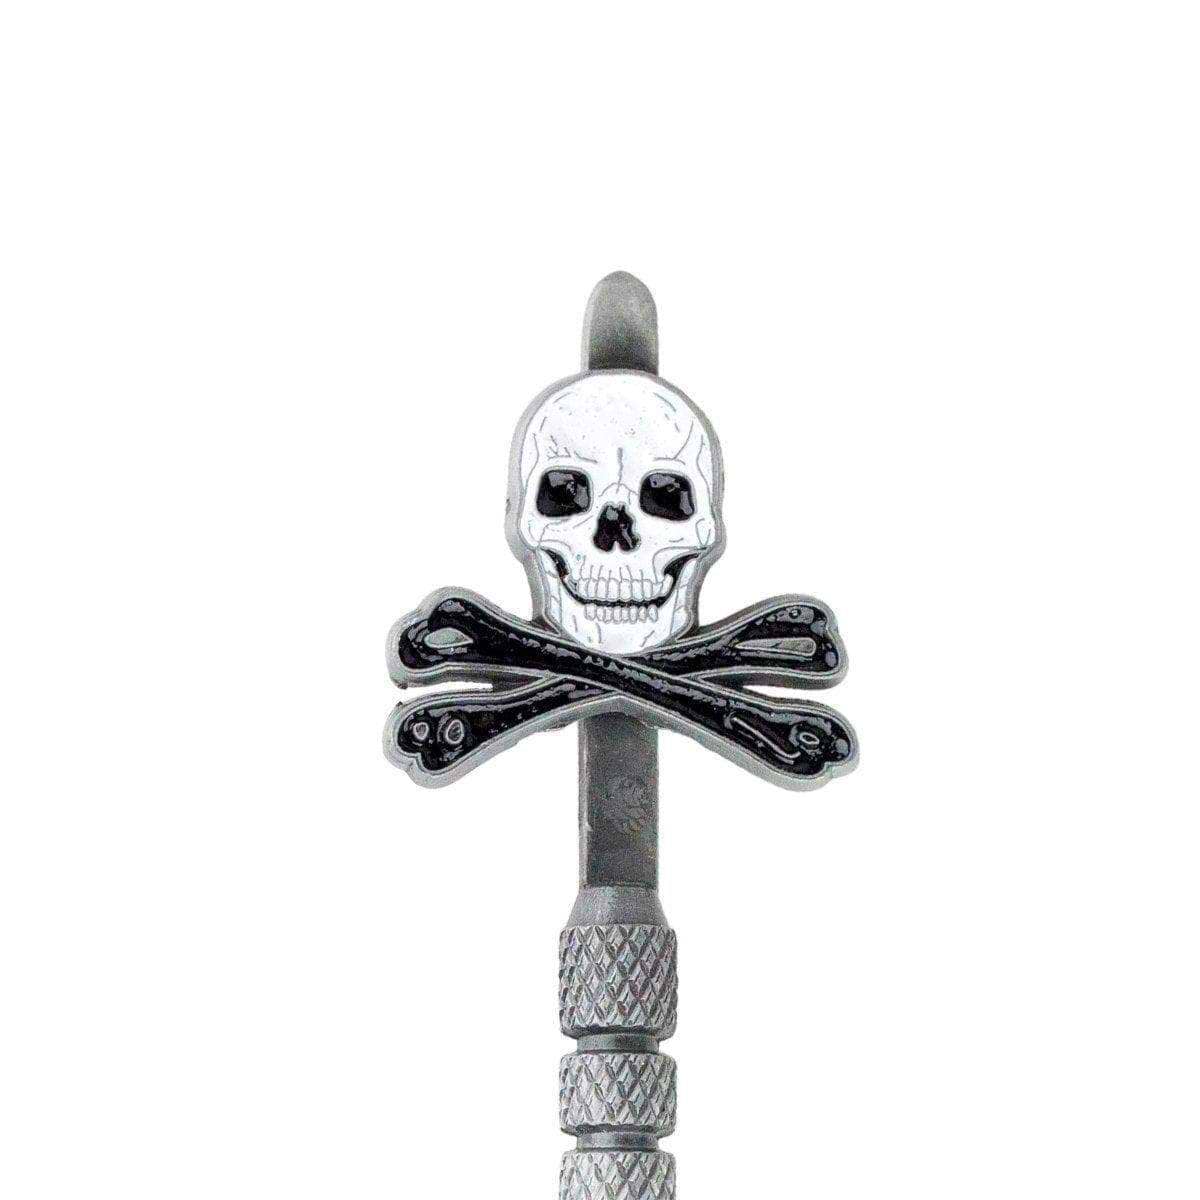 Easy-to-use dab tool smoking accessory made of metal with a dope skull and crossbones goth design on the handle